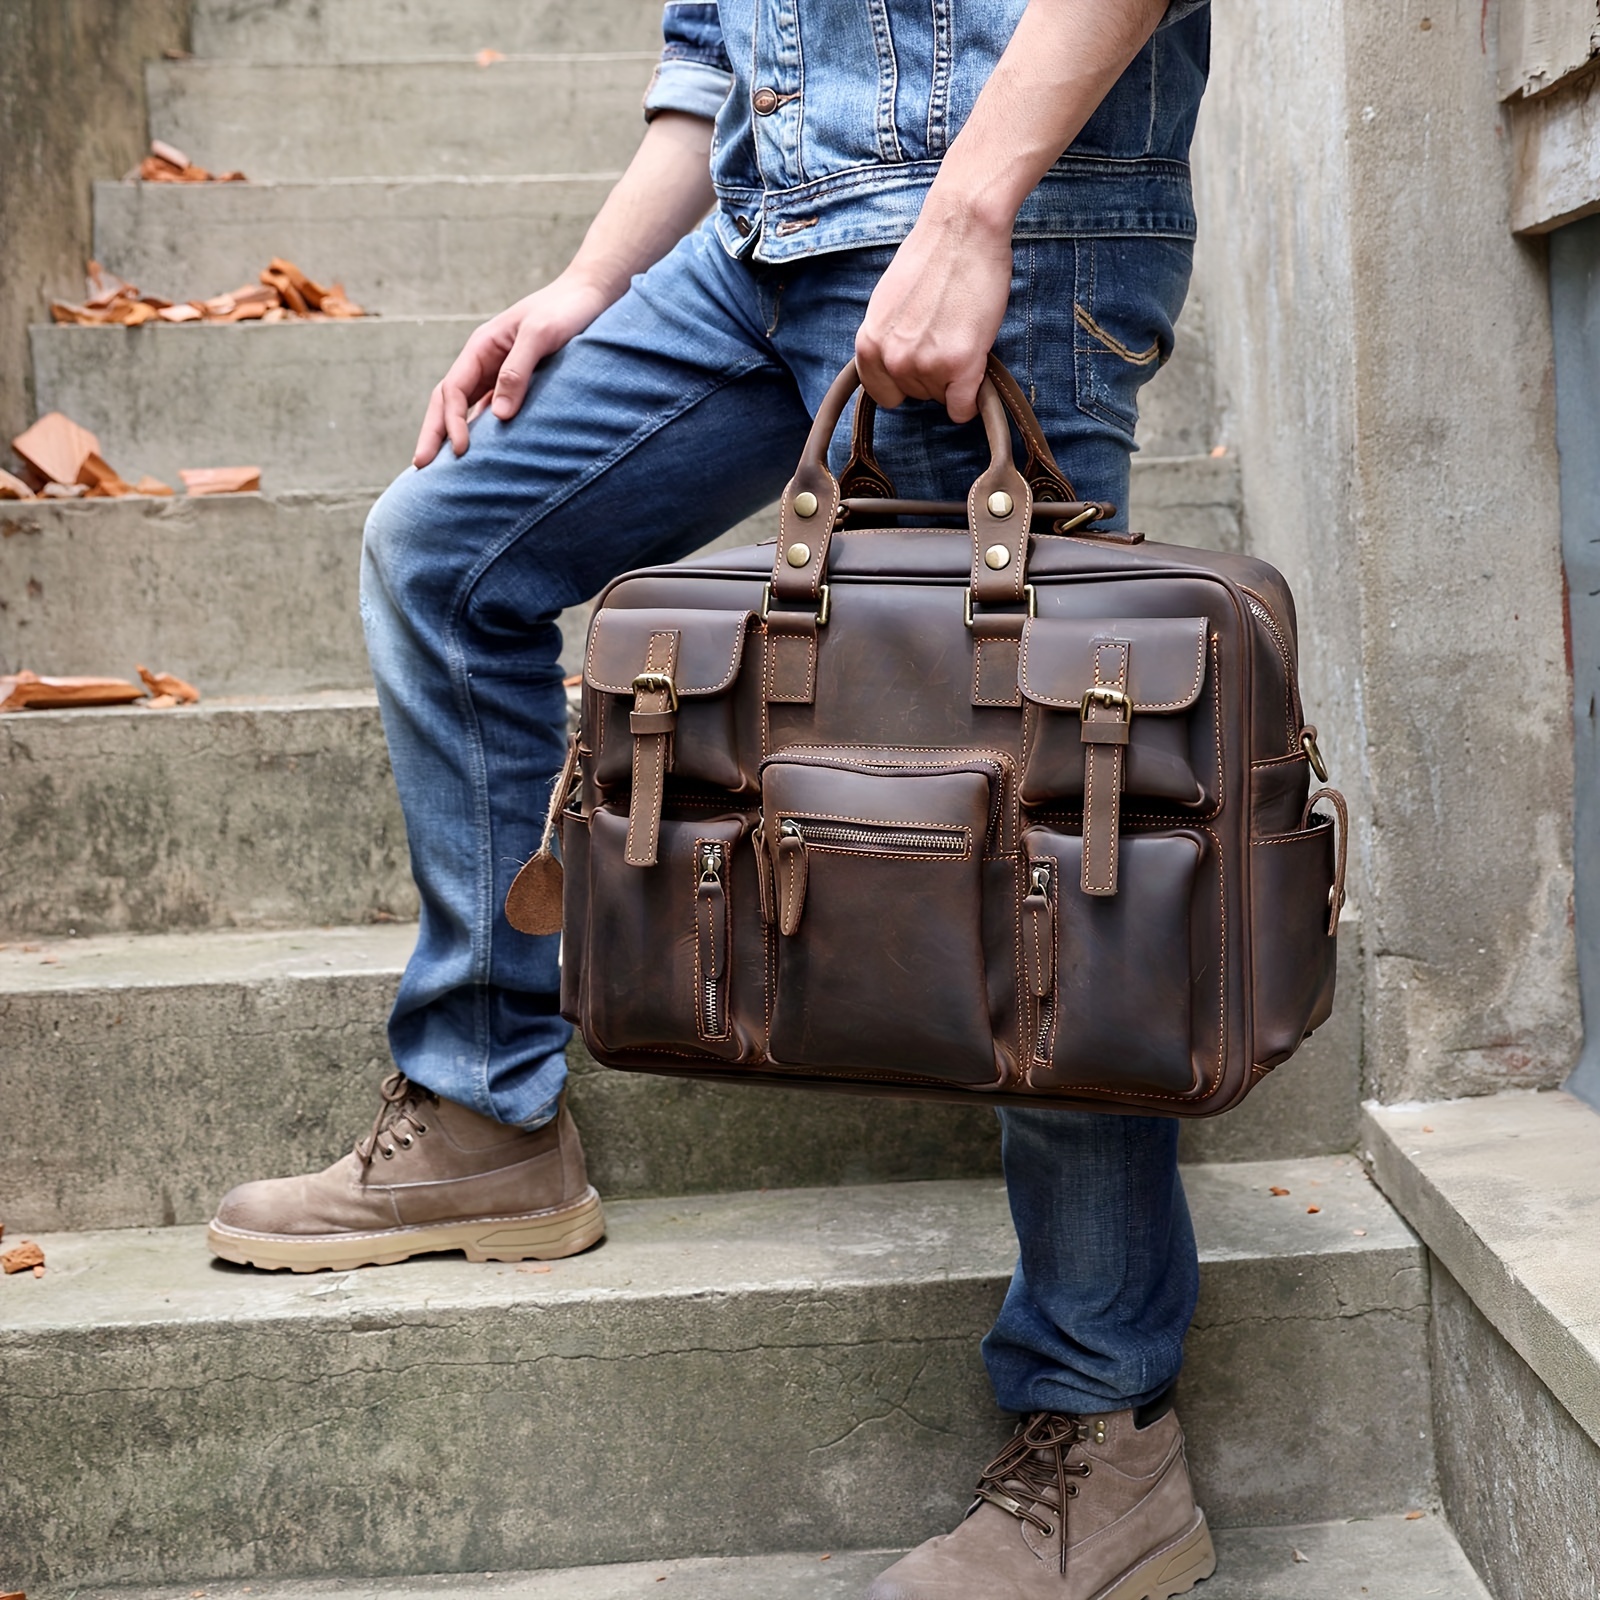 1pc Vintage Crossbody Briefcase Bag With Multiple Compartments & Laptop Sleeve For Business Trips & Traveling, Work Bags For Men\u002FWomen, - Click Image to Close